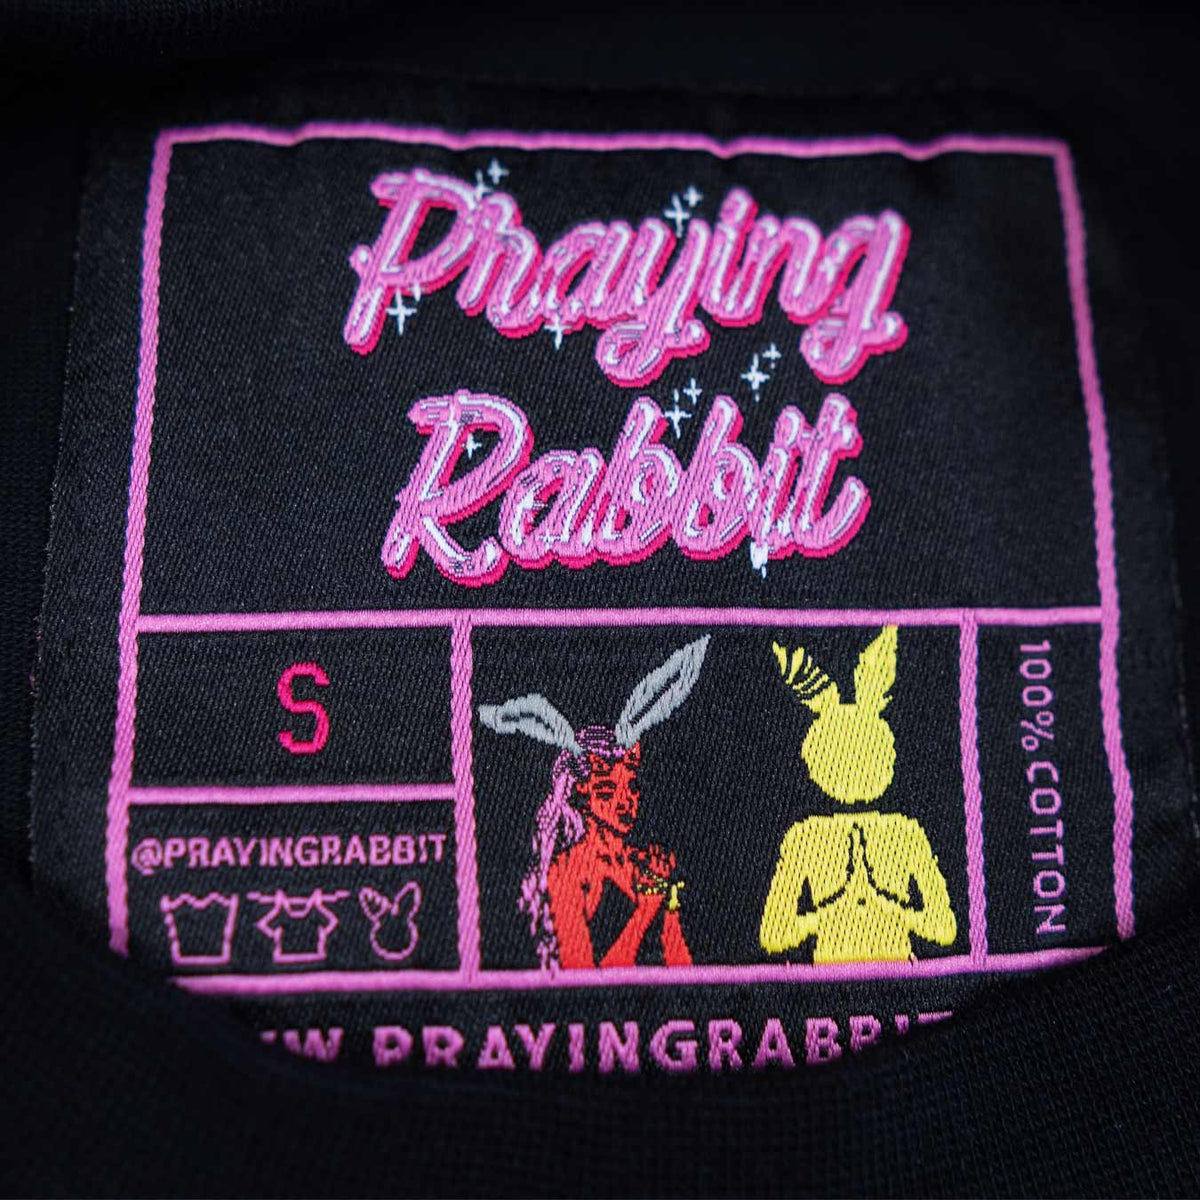 inside woven label that matches the prayboy design.